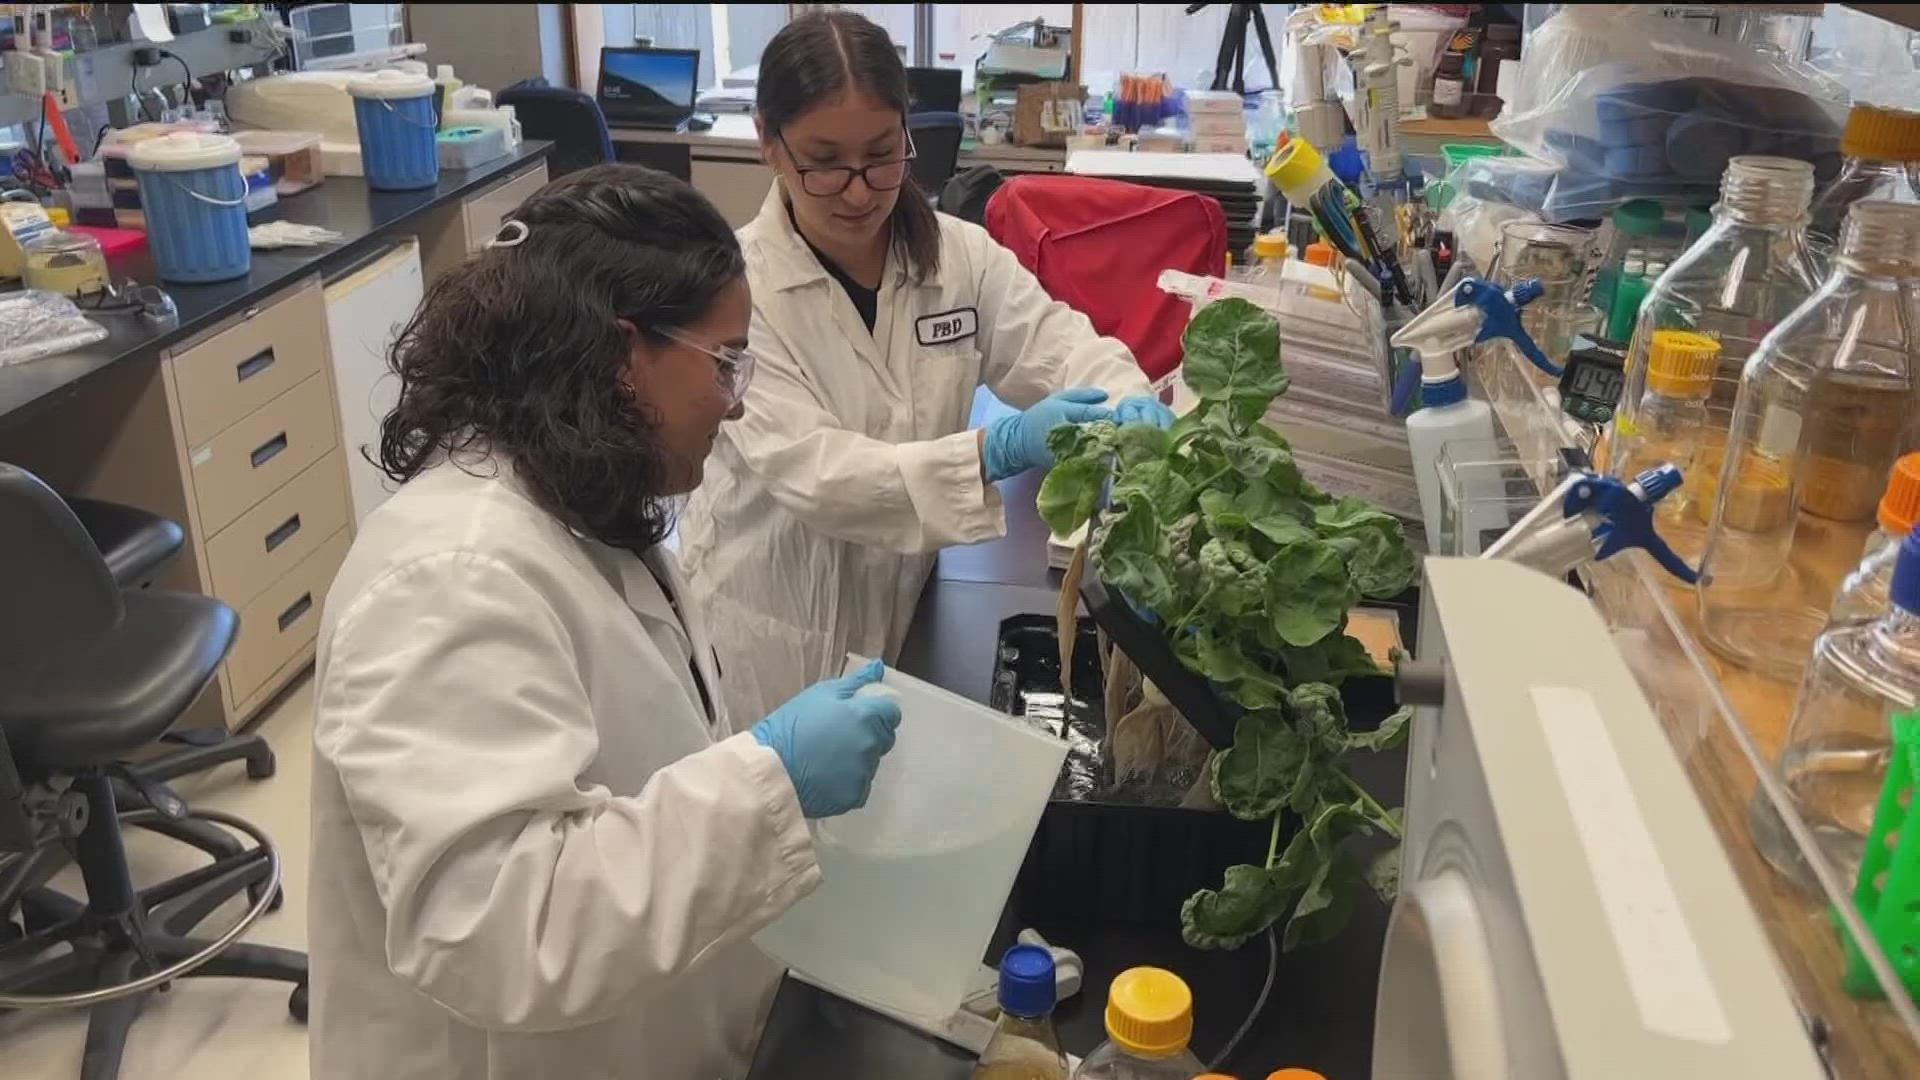 The Salk Institute’s High School Summer Scholar Program explores science careers with paid internships for students.